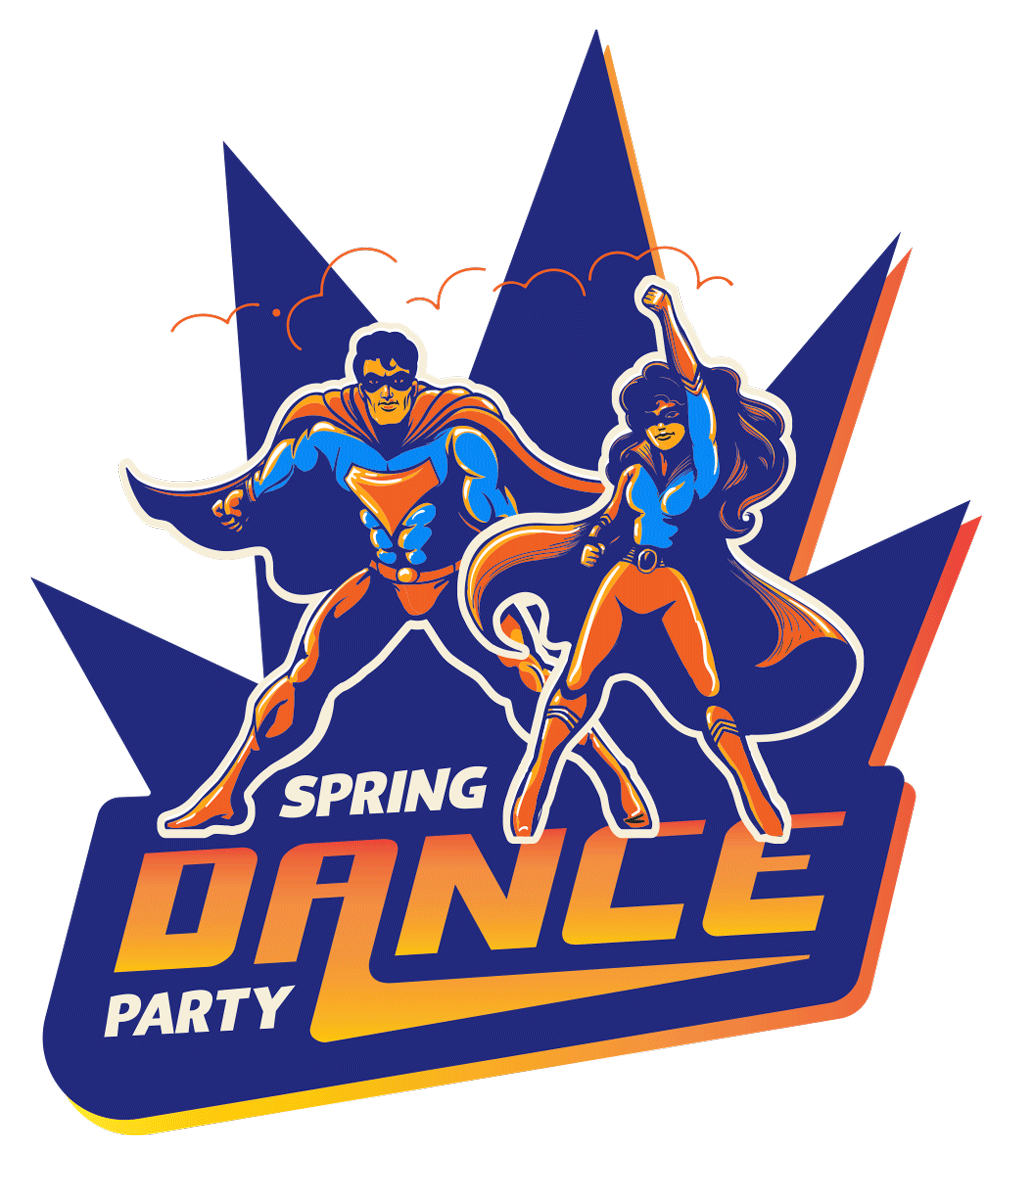 Spring Dance Party